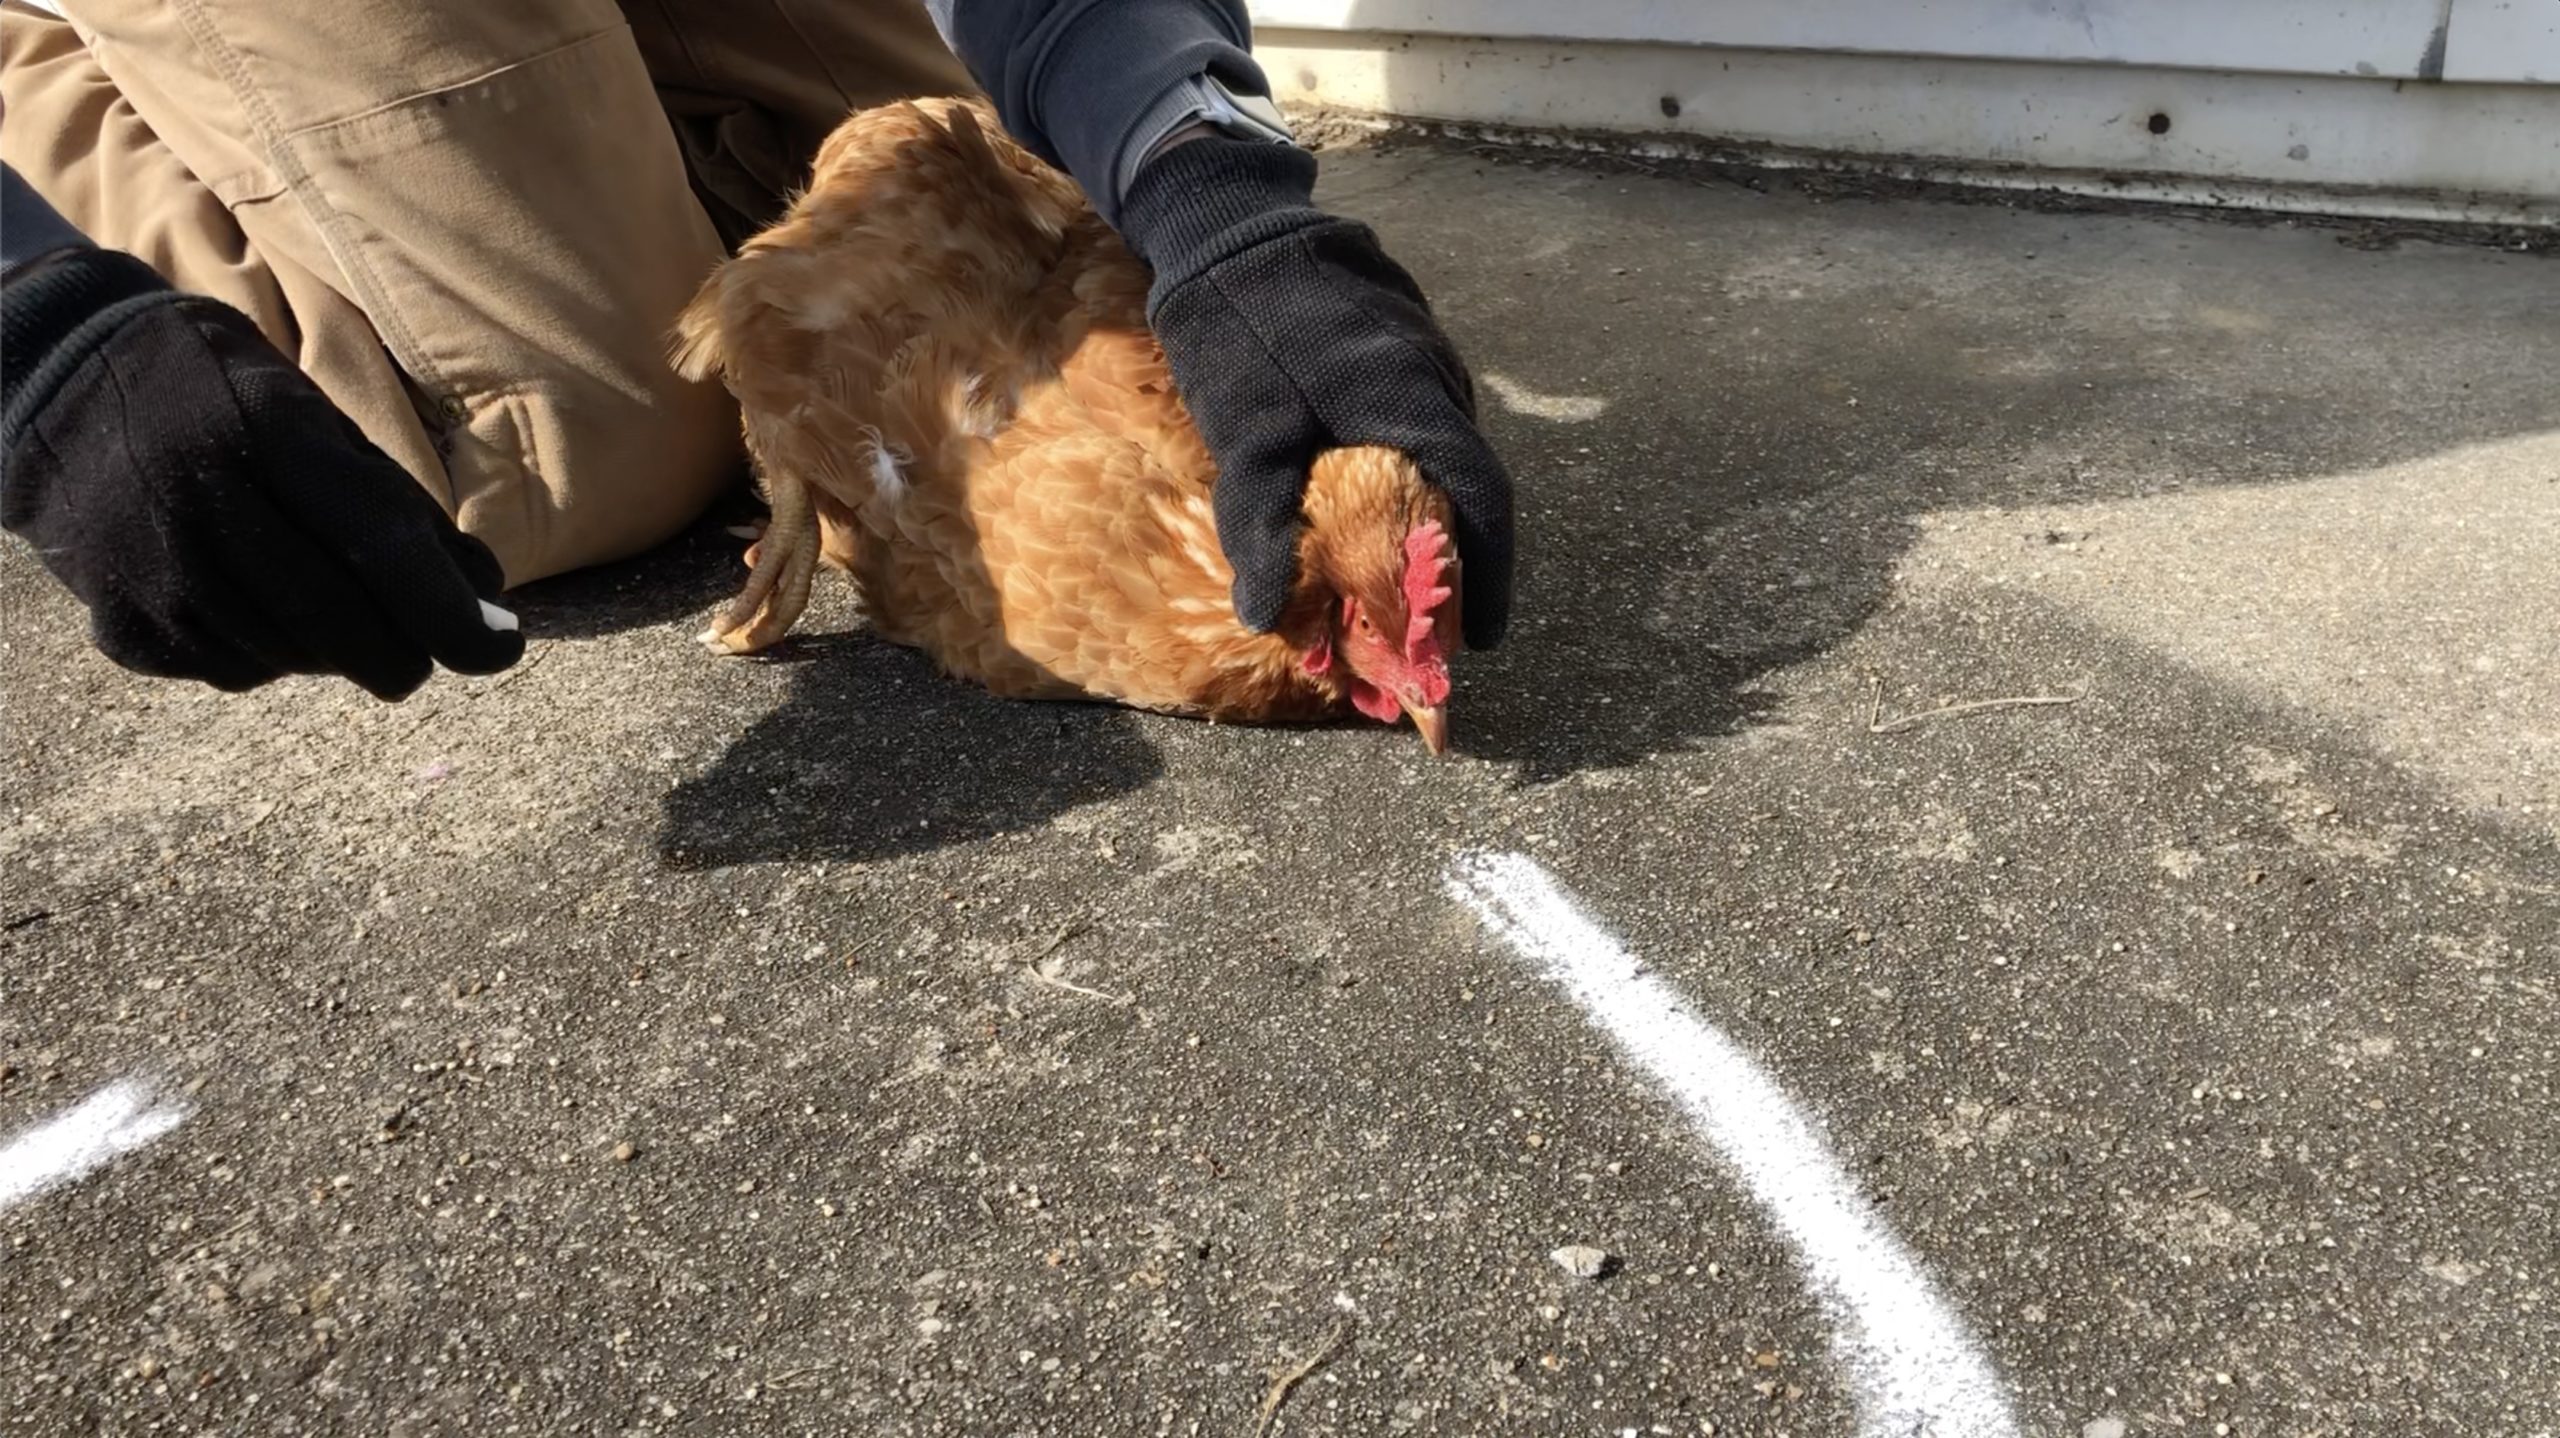 Drawing a Straight Line in Front of the Chicken to Hypnotize It